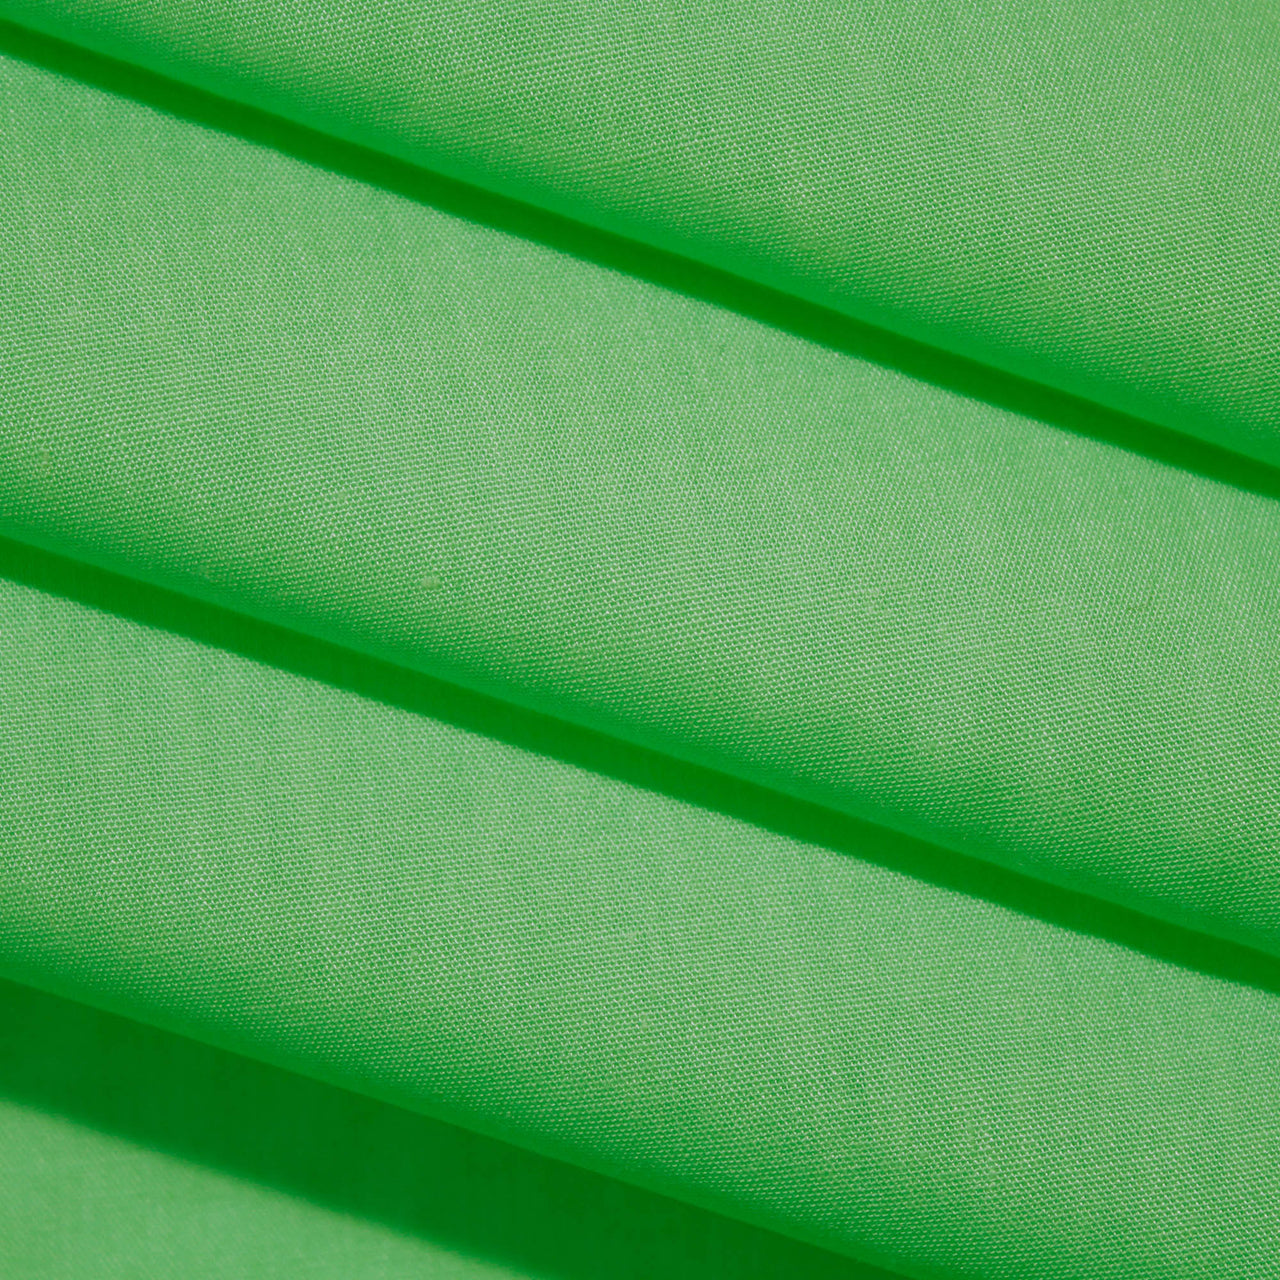 Lime Green - Superior Quality Plain Poly Cotton - Width 114cm